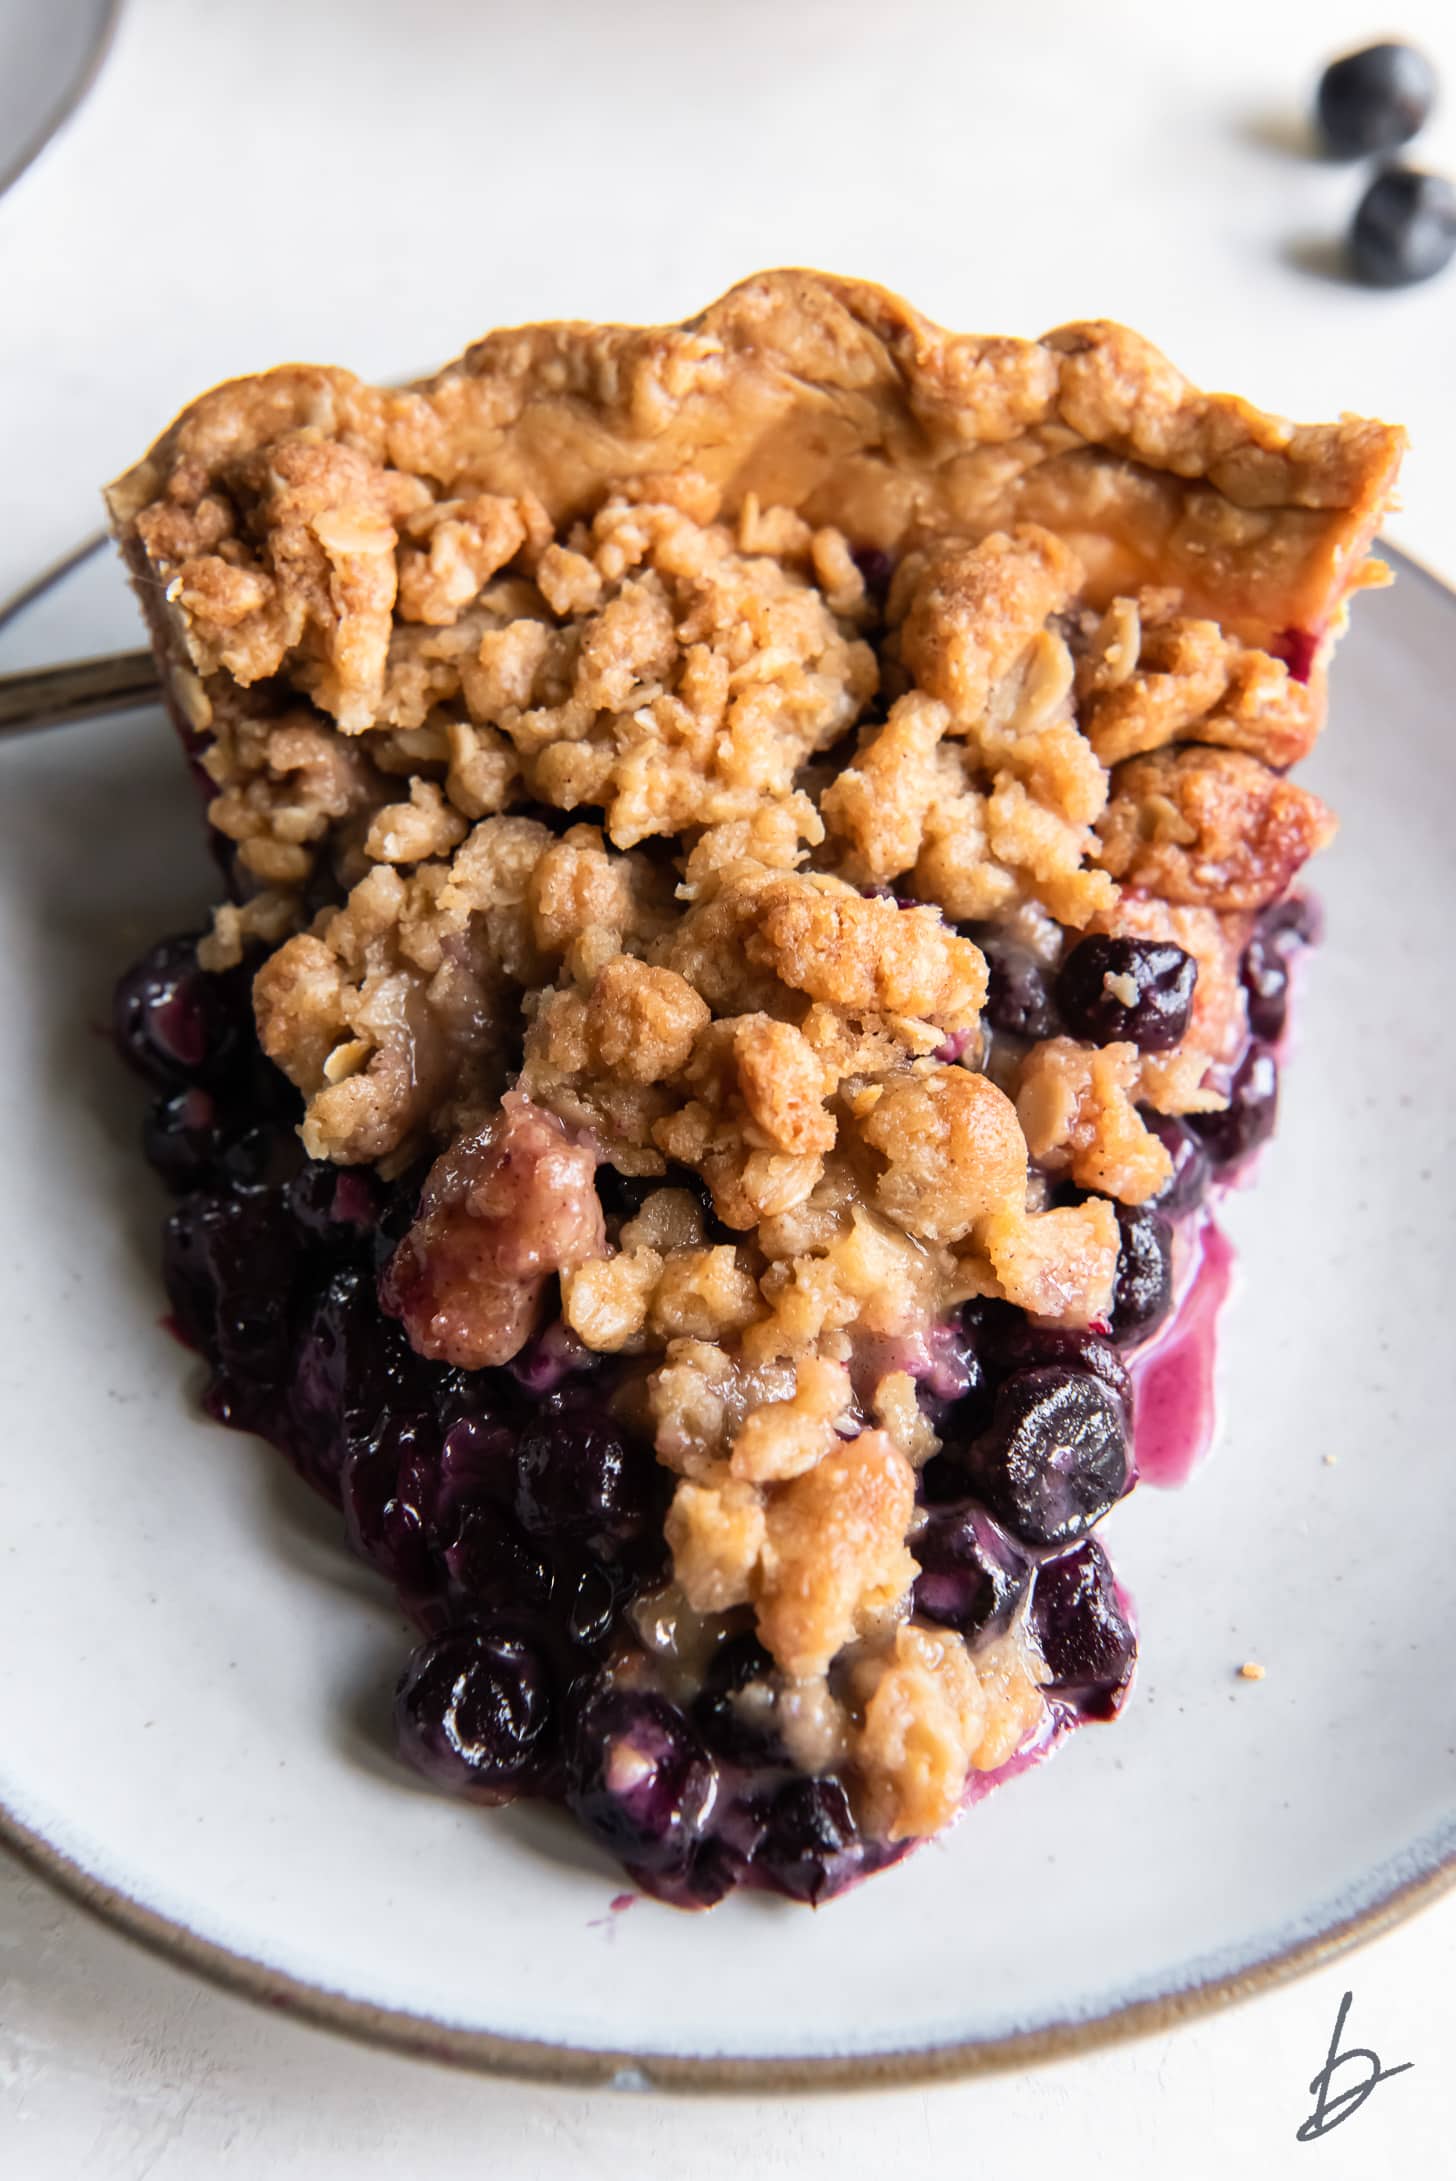 slice of blueberry crumble pie on a grey plate